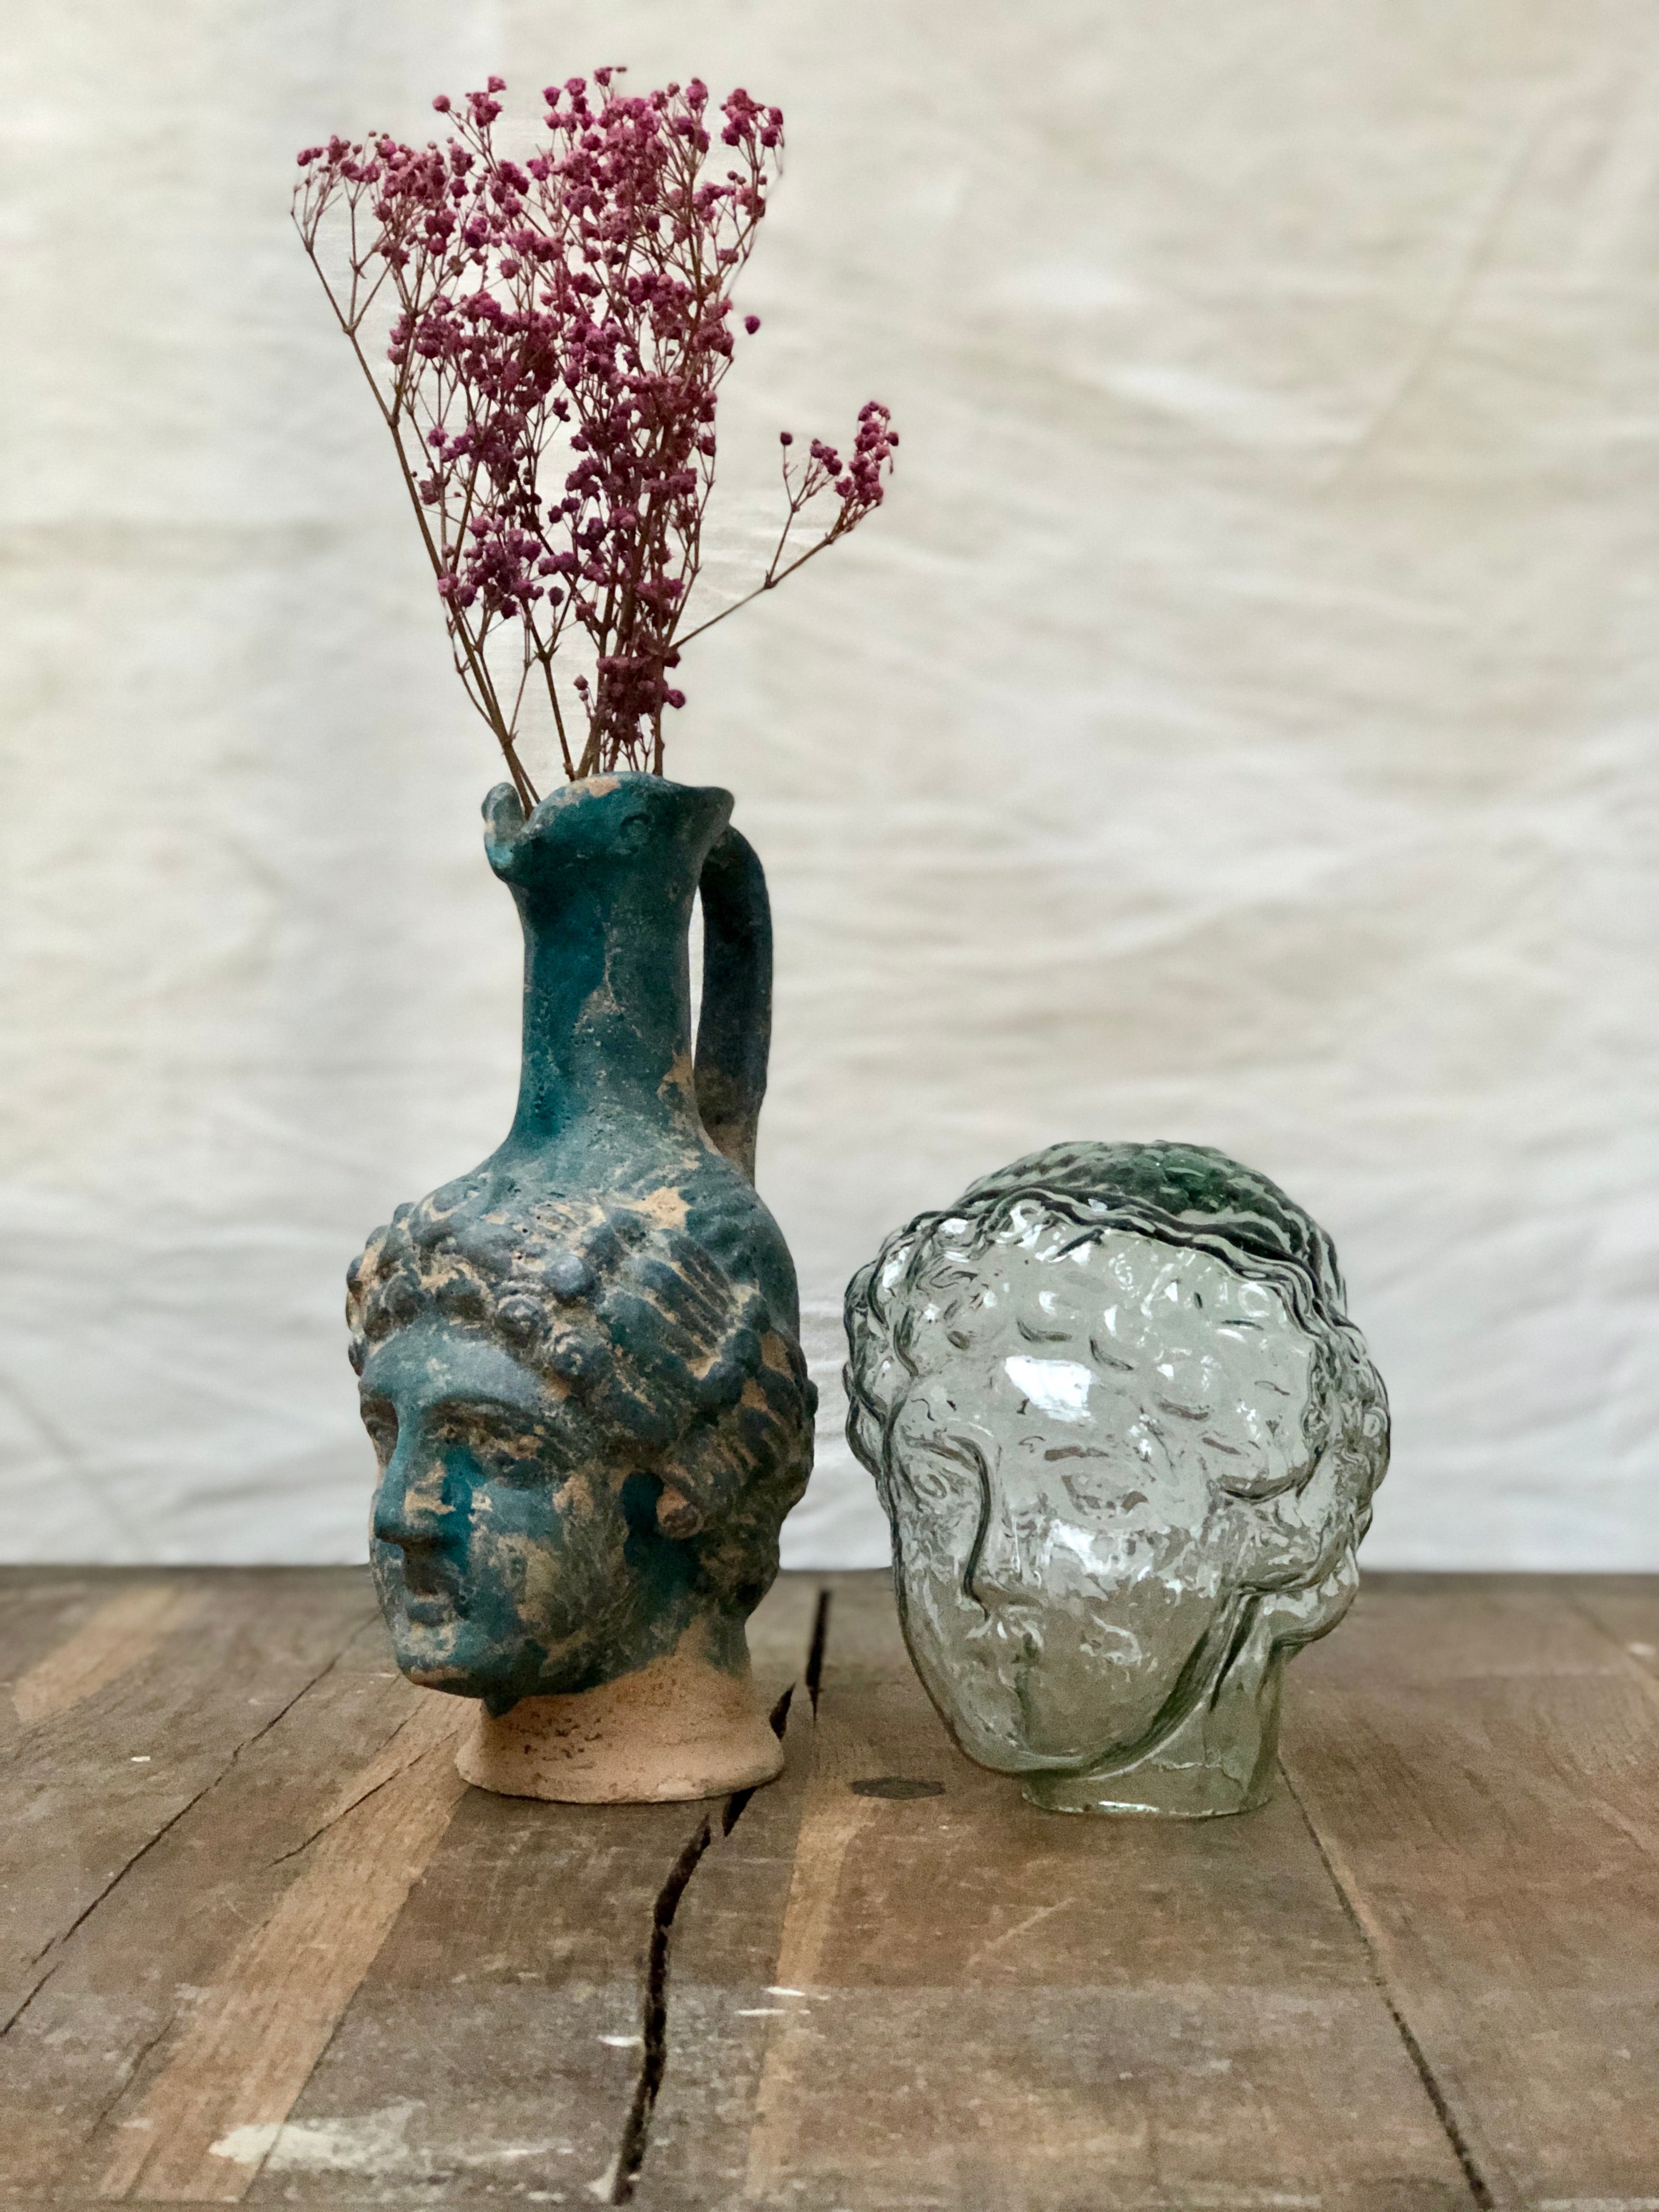 La Soufflerie offers a curated range of handblown glassware made exclusively from recycled glass